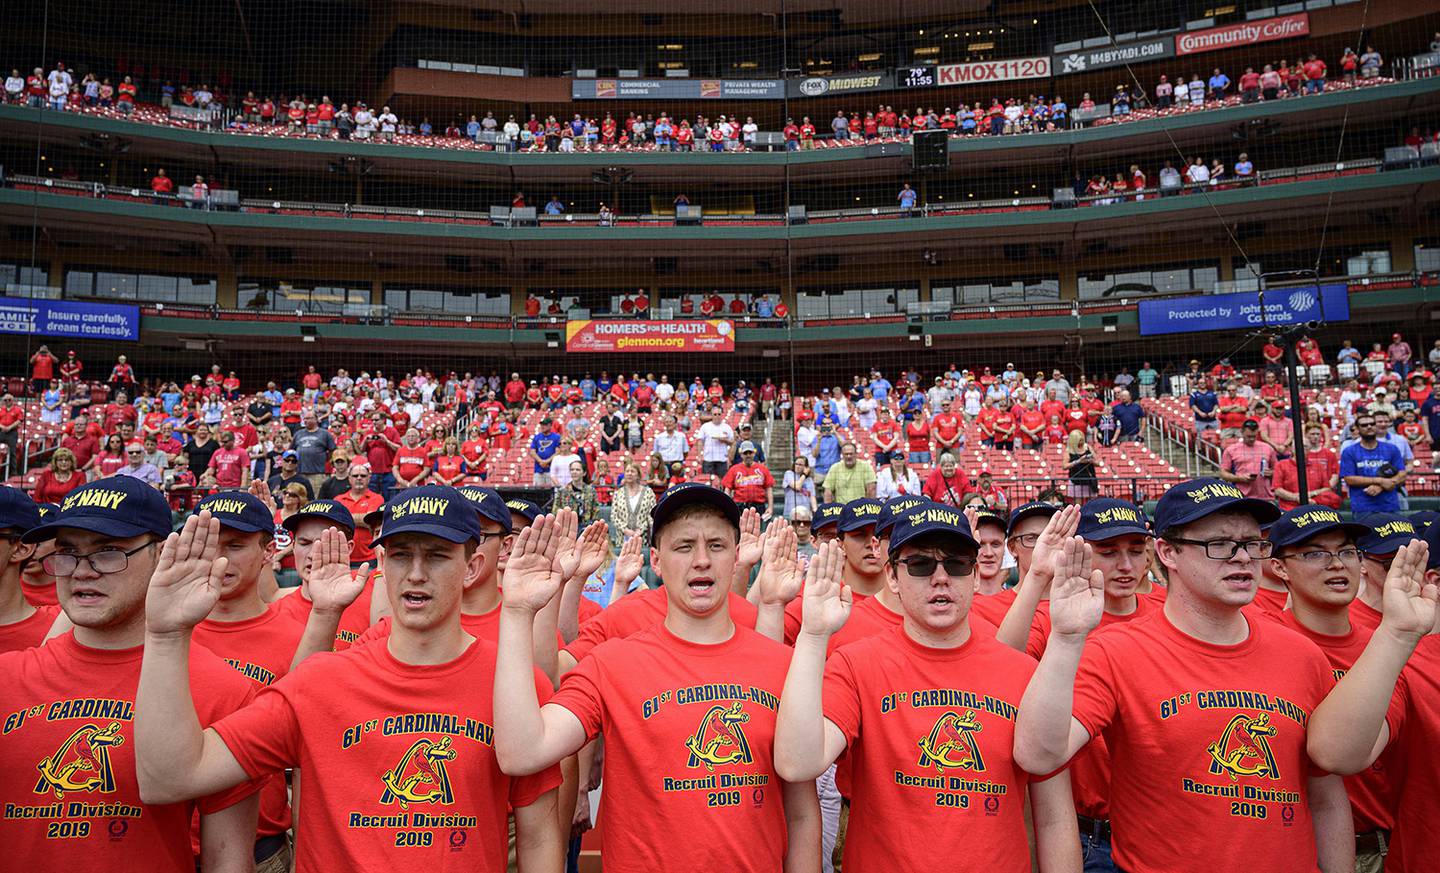 Eighty-one recruits with the 61st Annual Recruit Cardinal Division recite the oath of enlistment at Busch Stadium during a pre-game ceremony, June 6, 2019, in St. Louis.